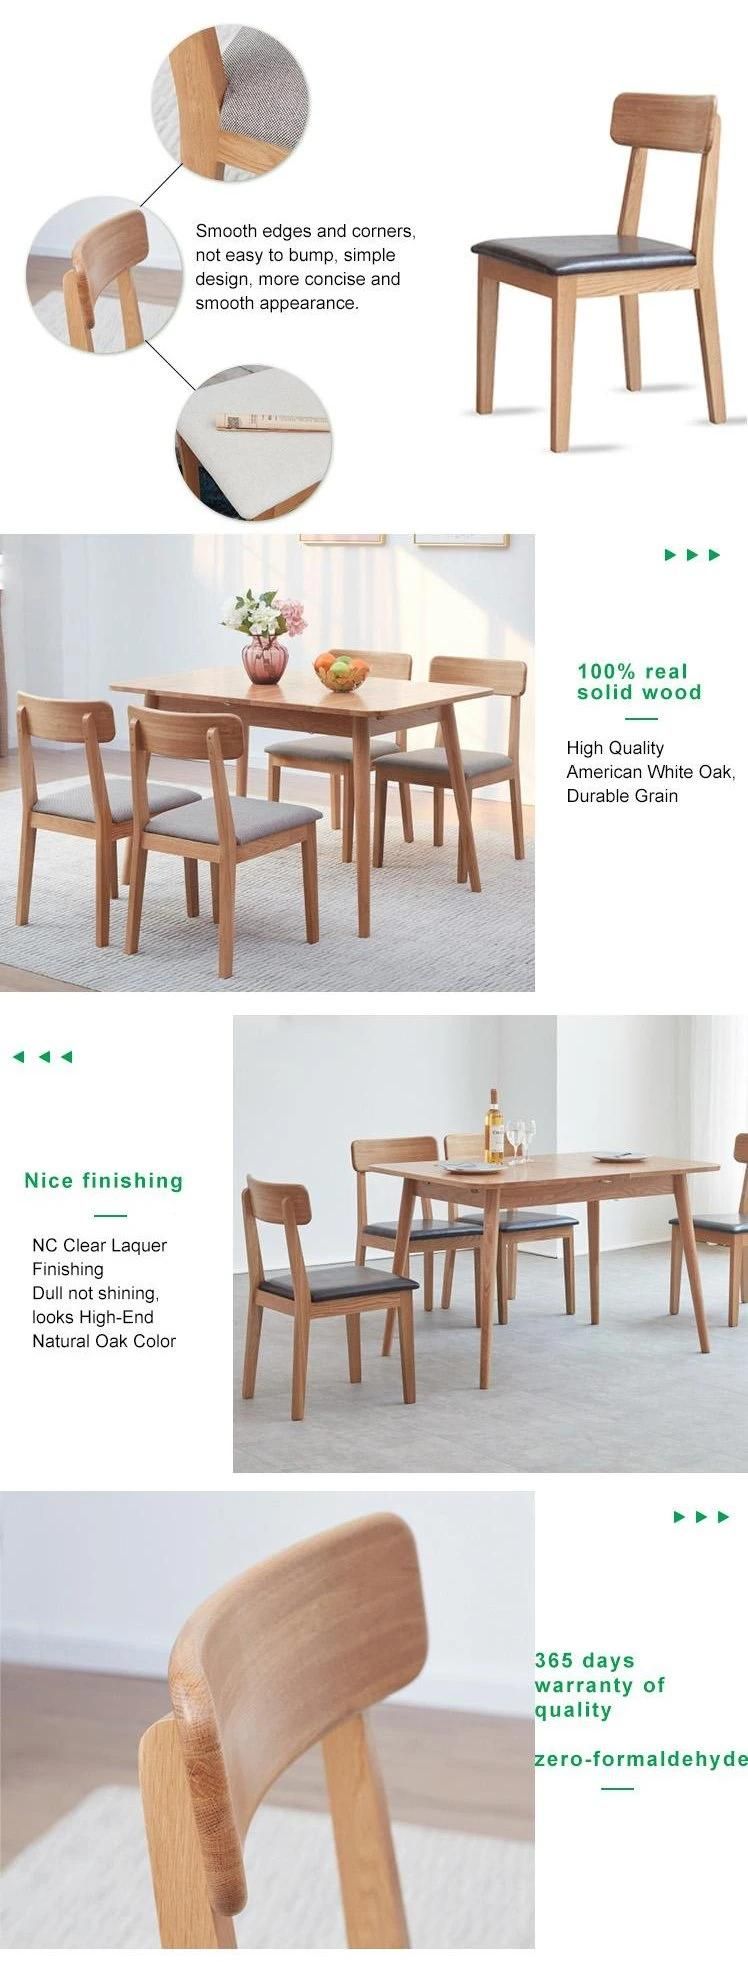 Furniture Modern Furniture Chair Home Furniture Living Room Furniture Standard Armless White Hans Wegner Dining Room Table Fabric Upholstered Chair Set